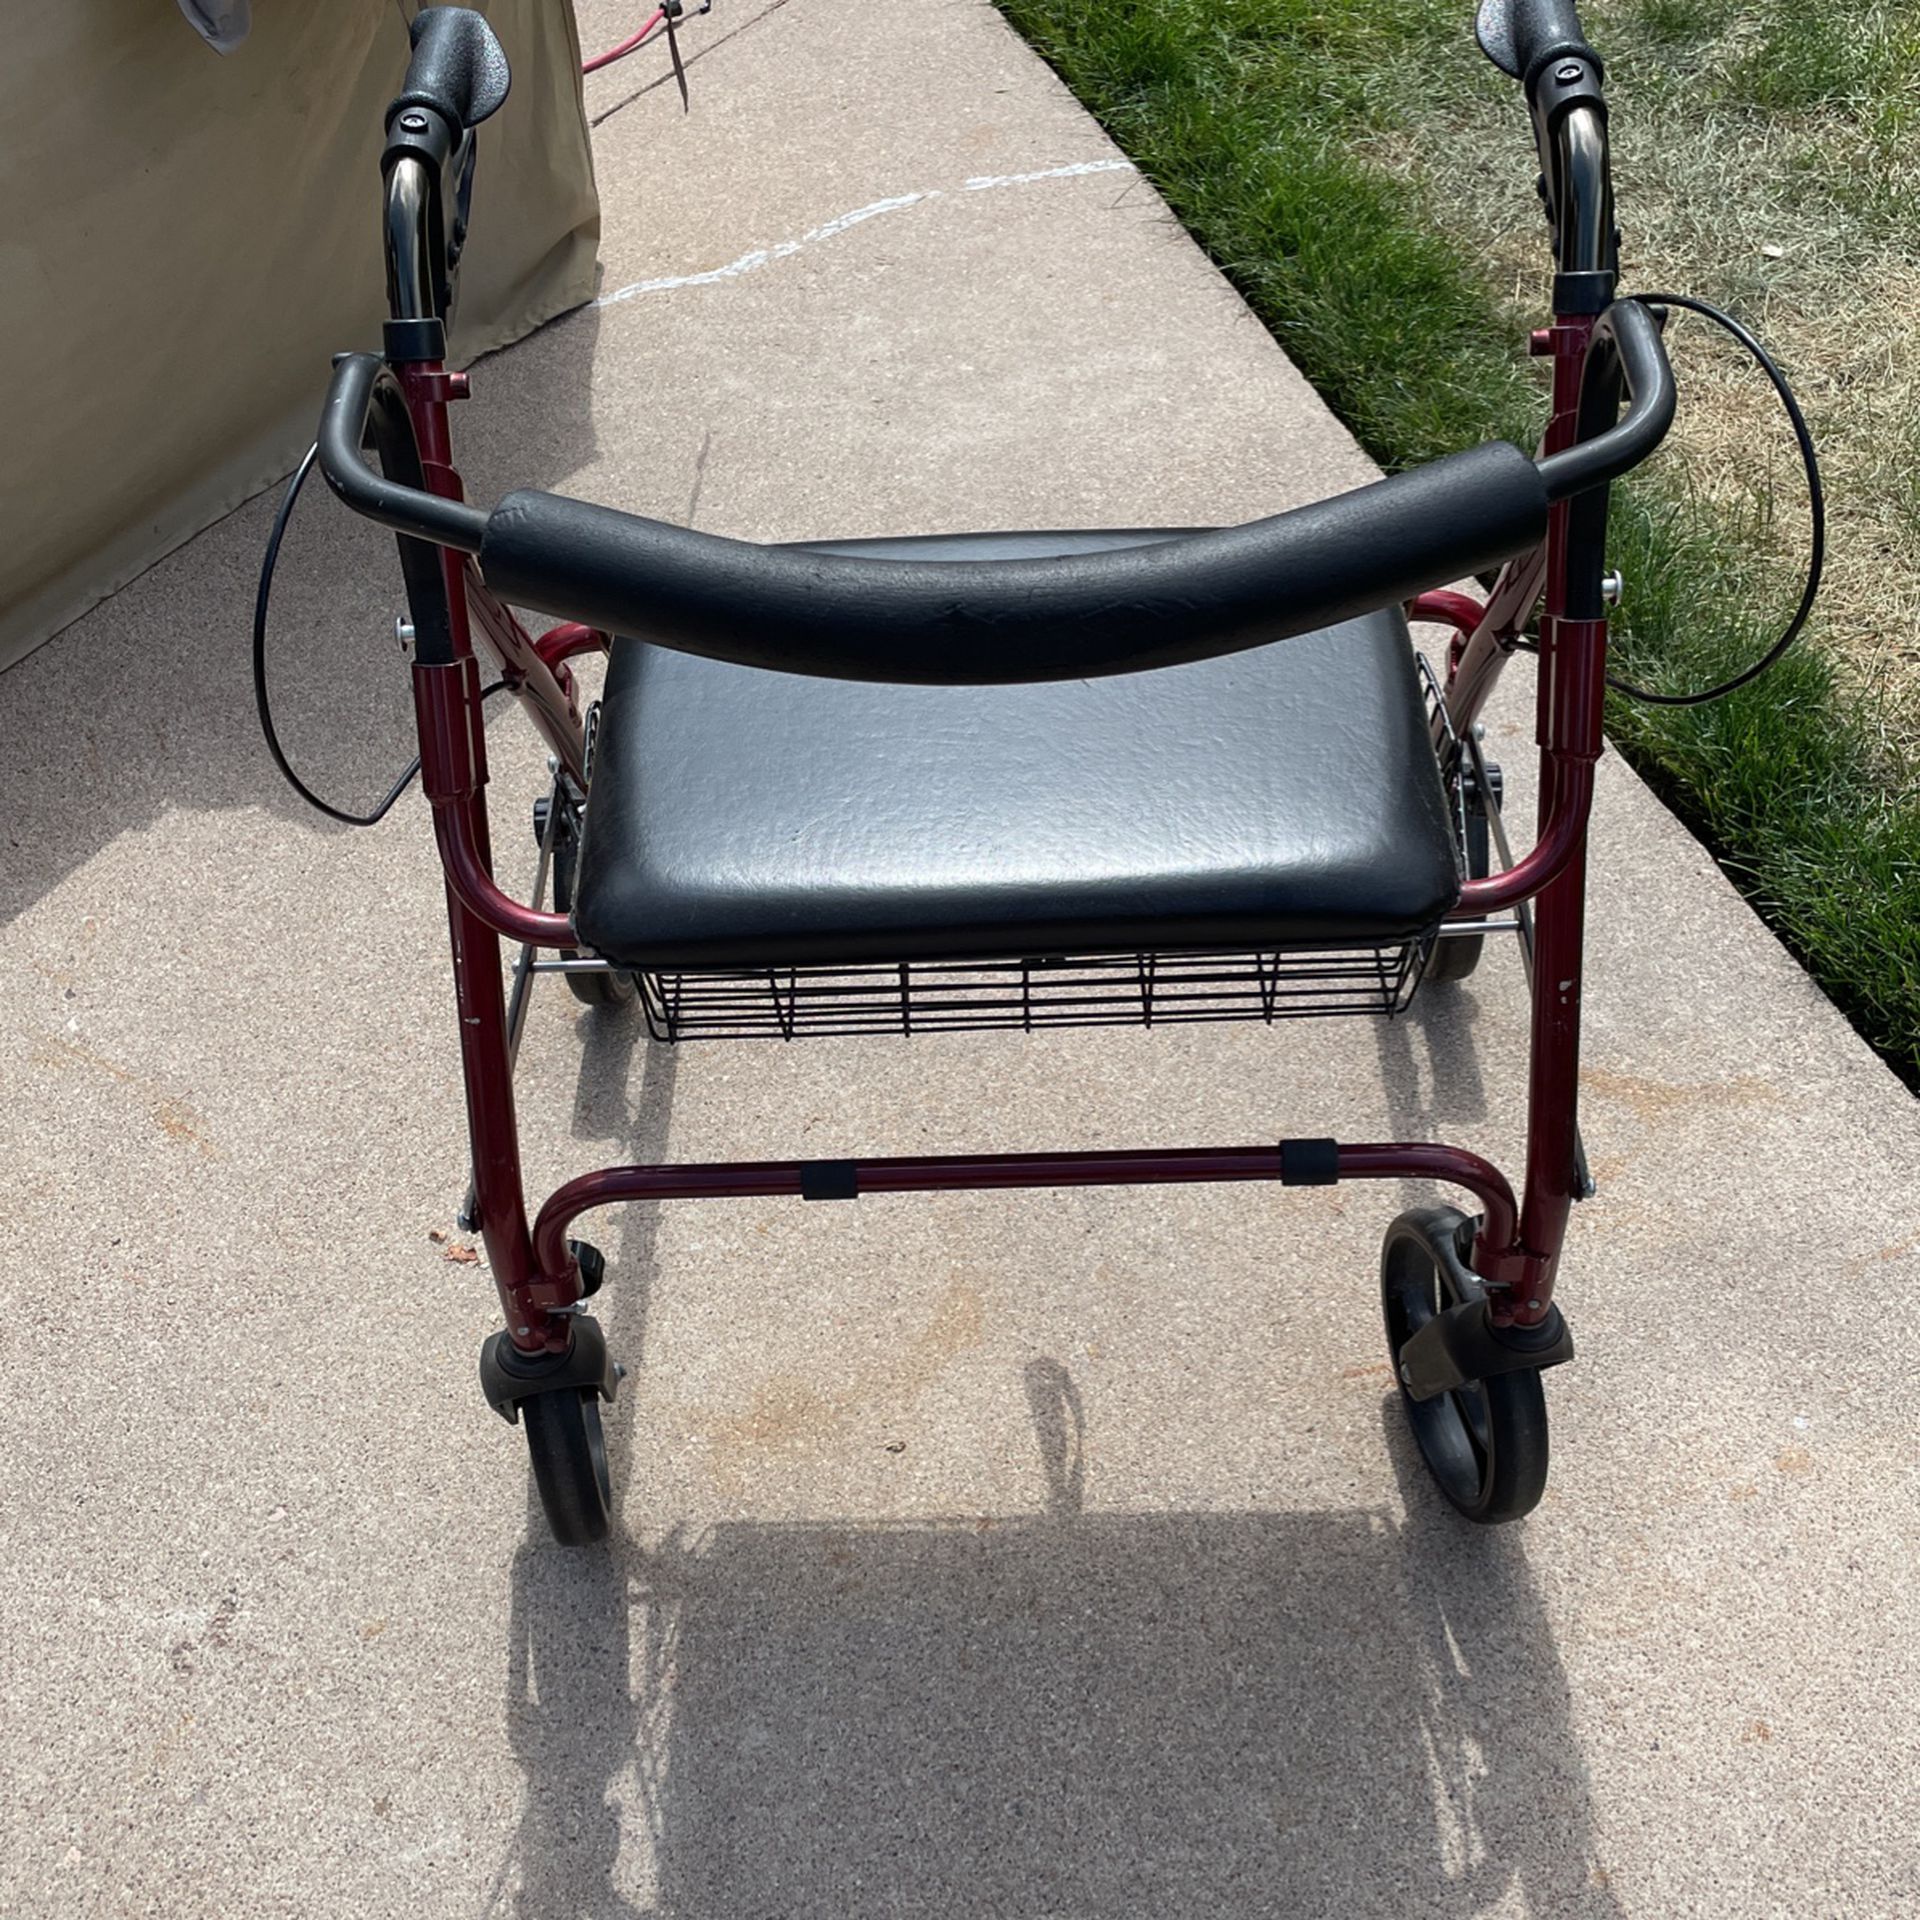 Lightly used Walker with basket and seat